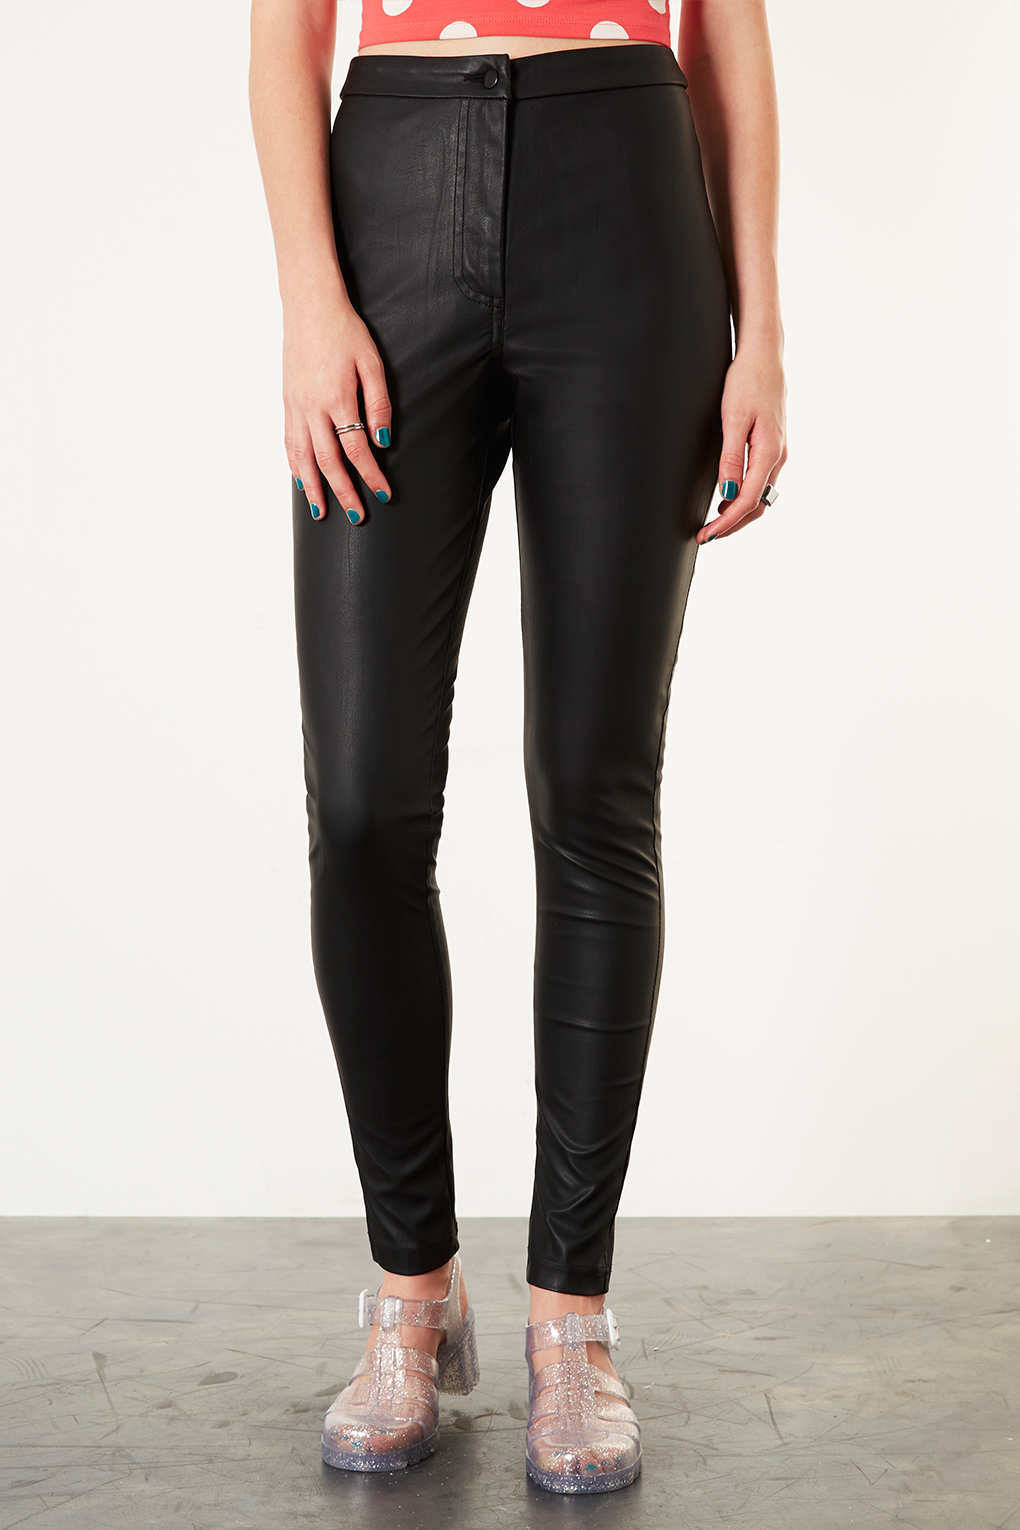 topshop high waisted trousers